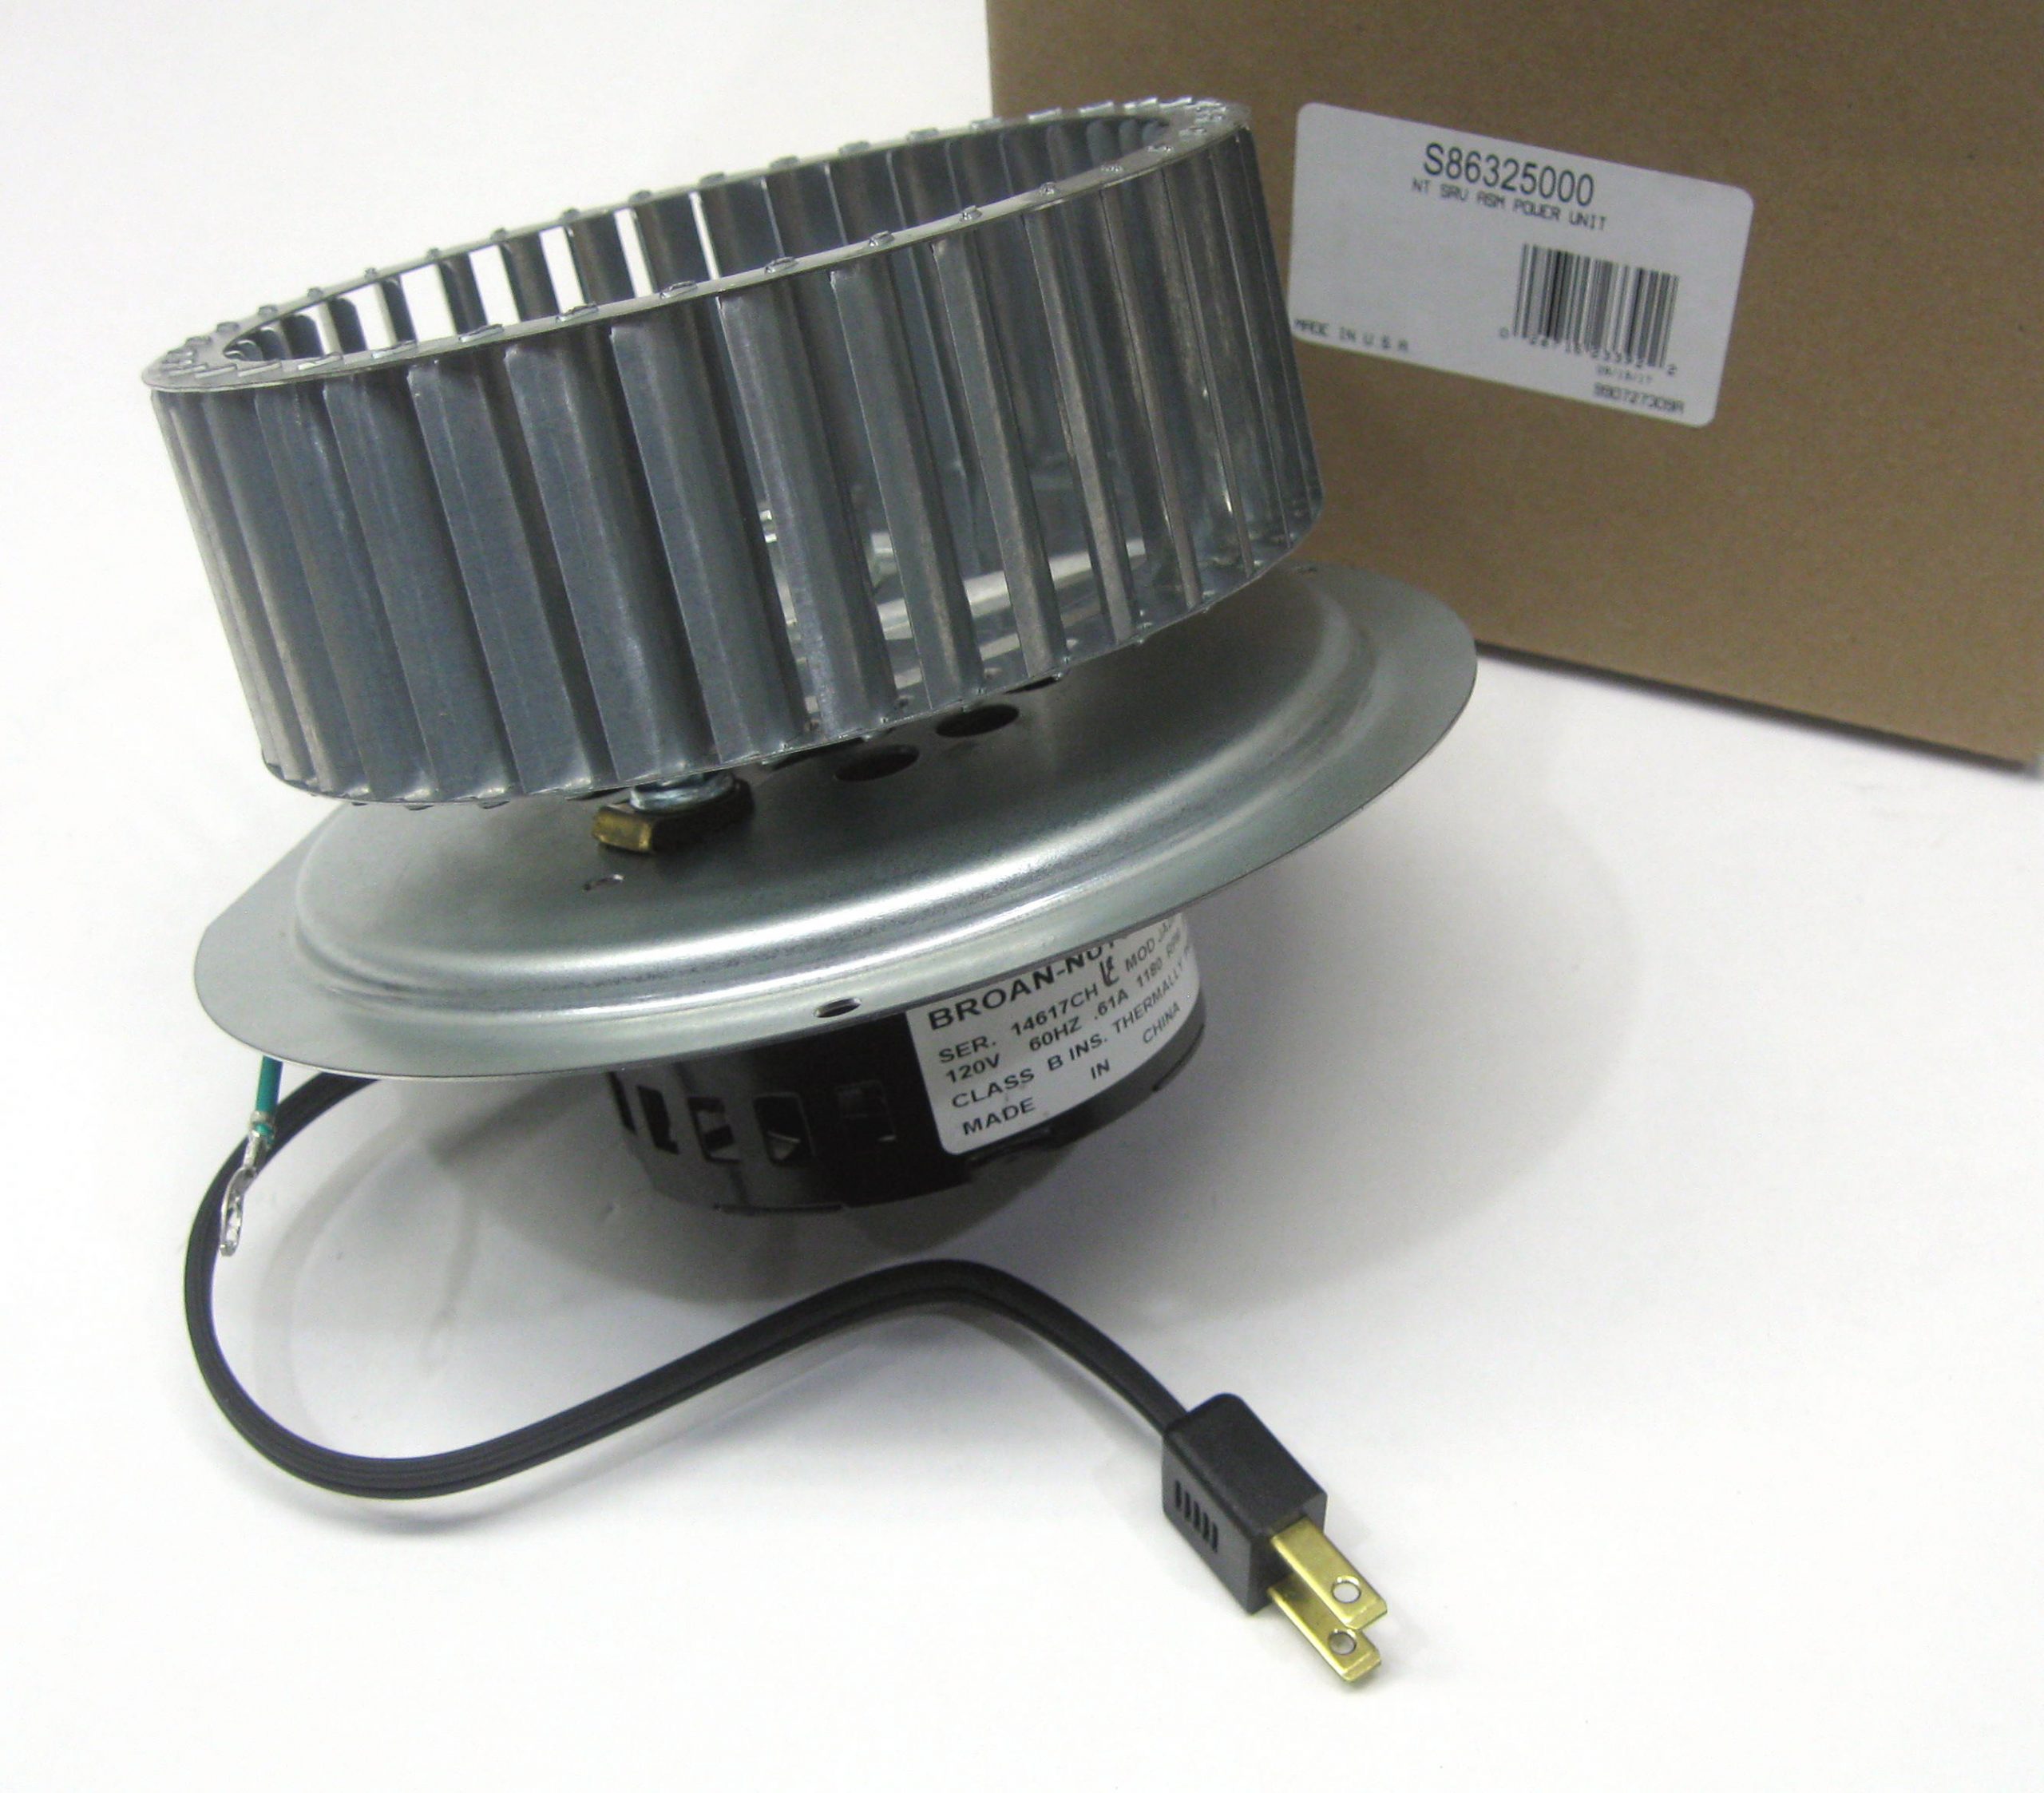 Details About Broan Nutone S86325000 Exhaust Fan Motor And Blower For Qt90 Qt90t pertaining to dimensions 2672 X 2344